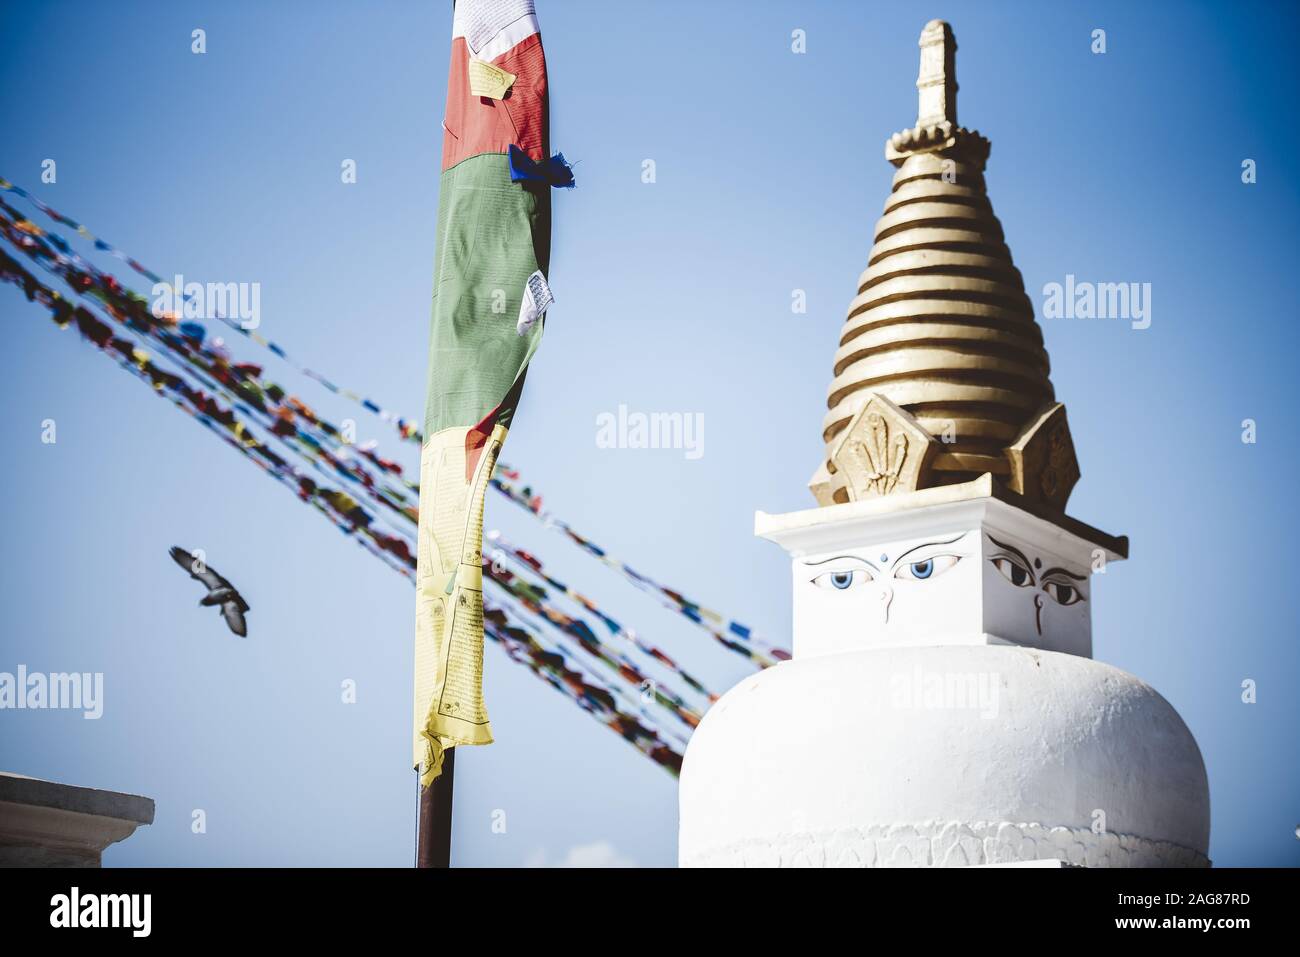 Closeup shot of a pole with prayer cloths wrapped around it near a temple with eyes painted on it Stock Photo